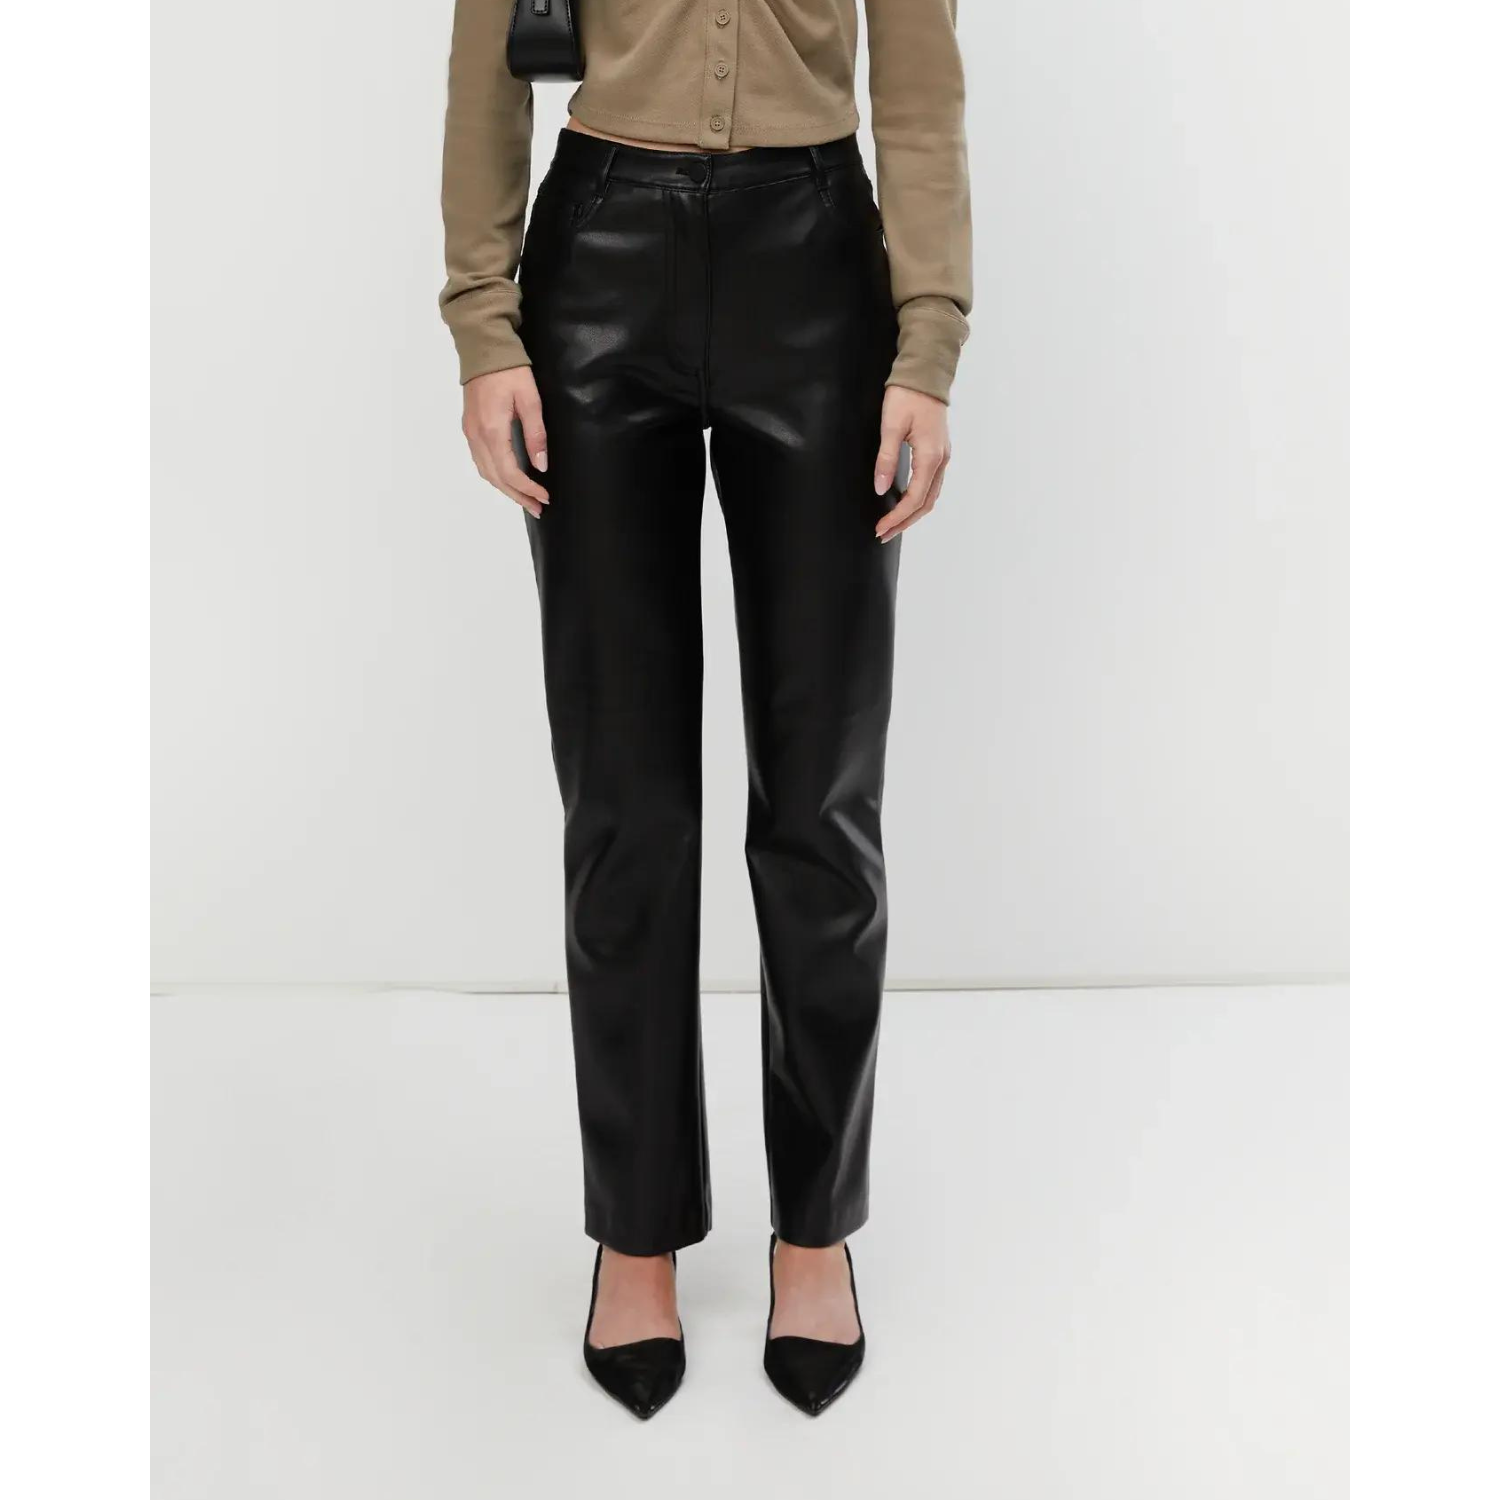 30 Faux-Leather Pants Under $150 That Are Trending This Fall